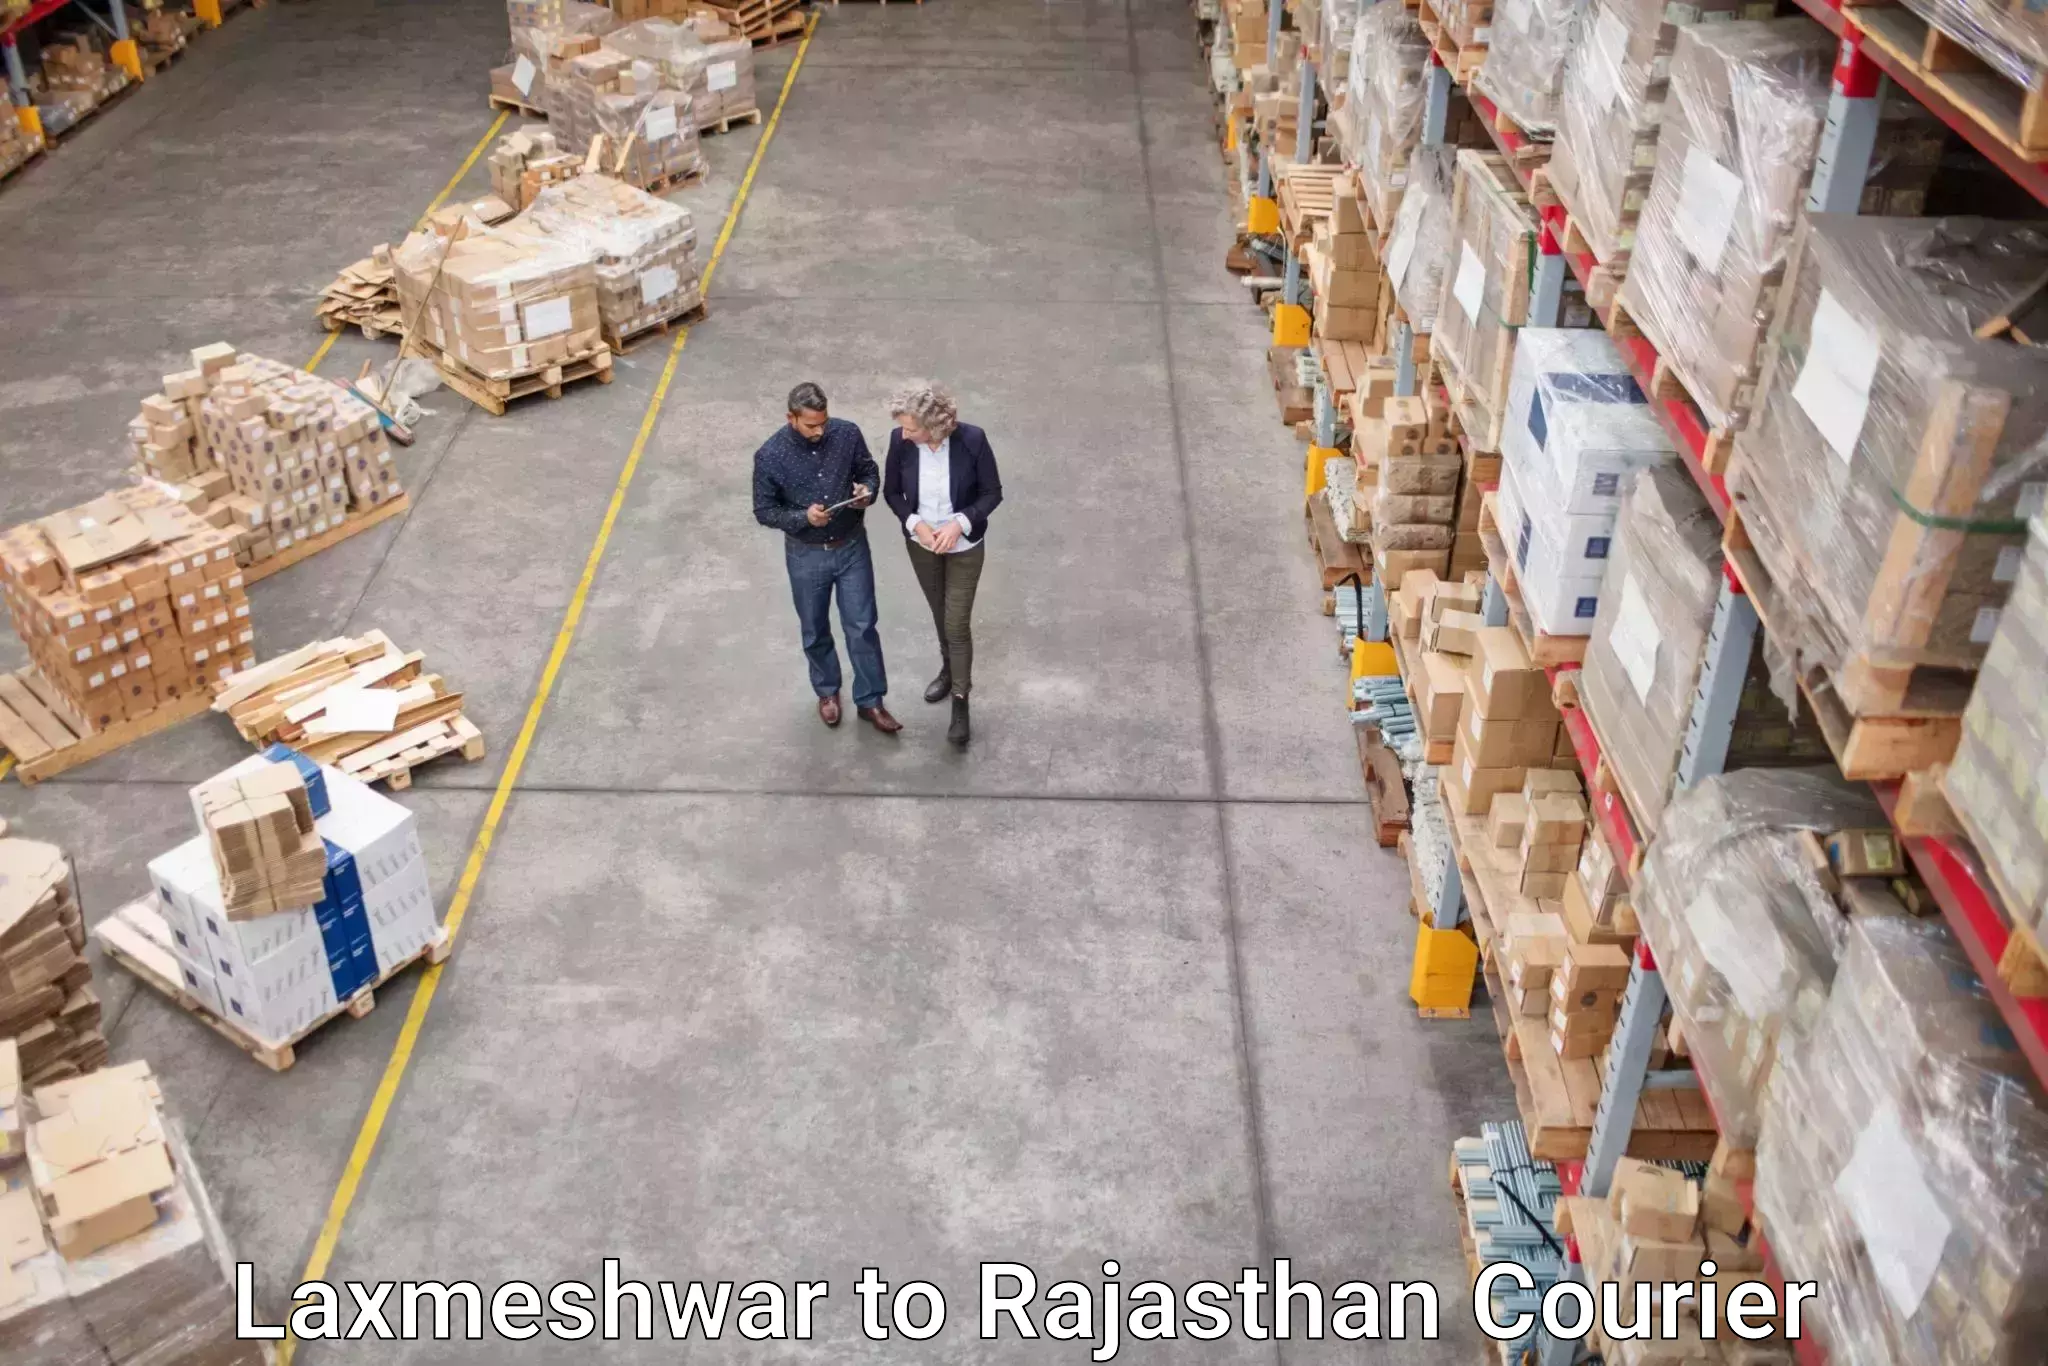 Full-service courier options Laxmeshwar to Nasirabad